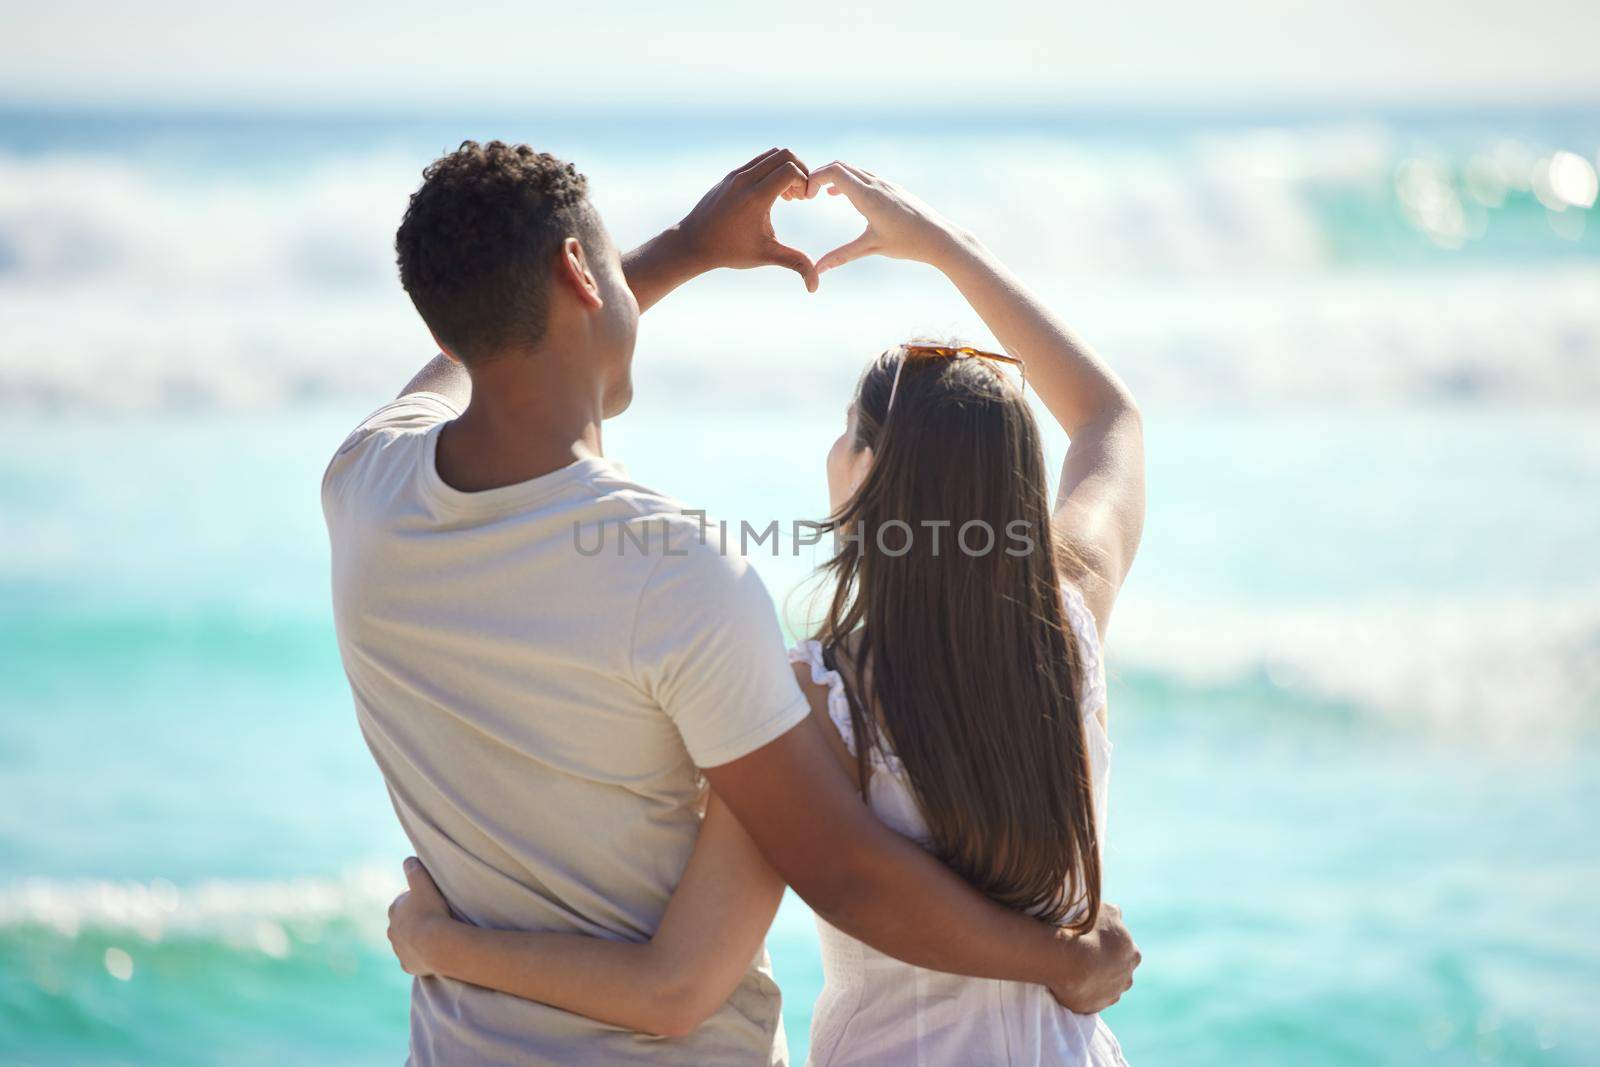 Our love runs deeper than the ocean. Shot of a young couple making a heart gesture with their hands at the beach. by YuriArcurs